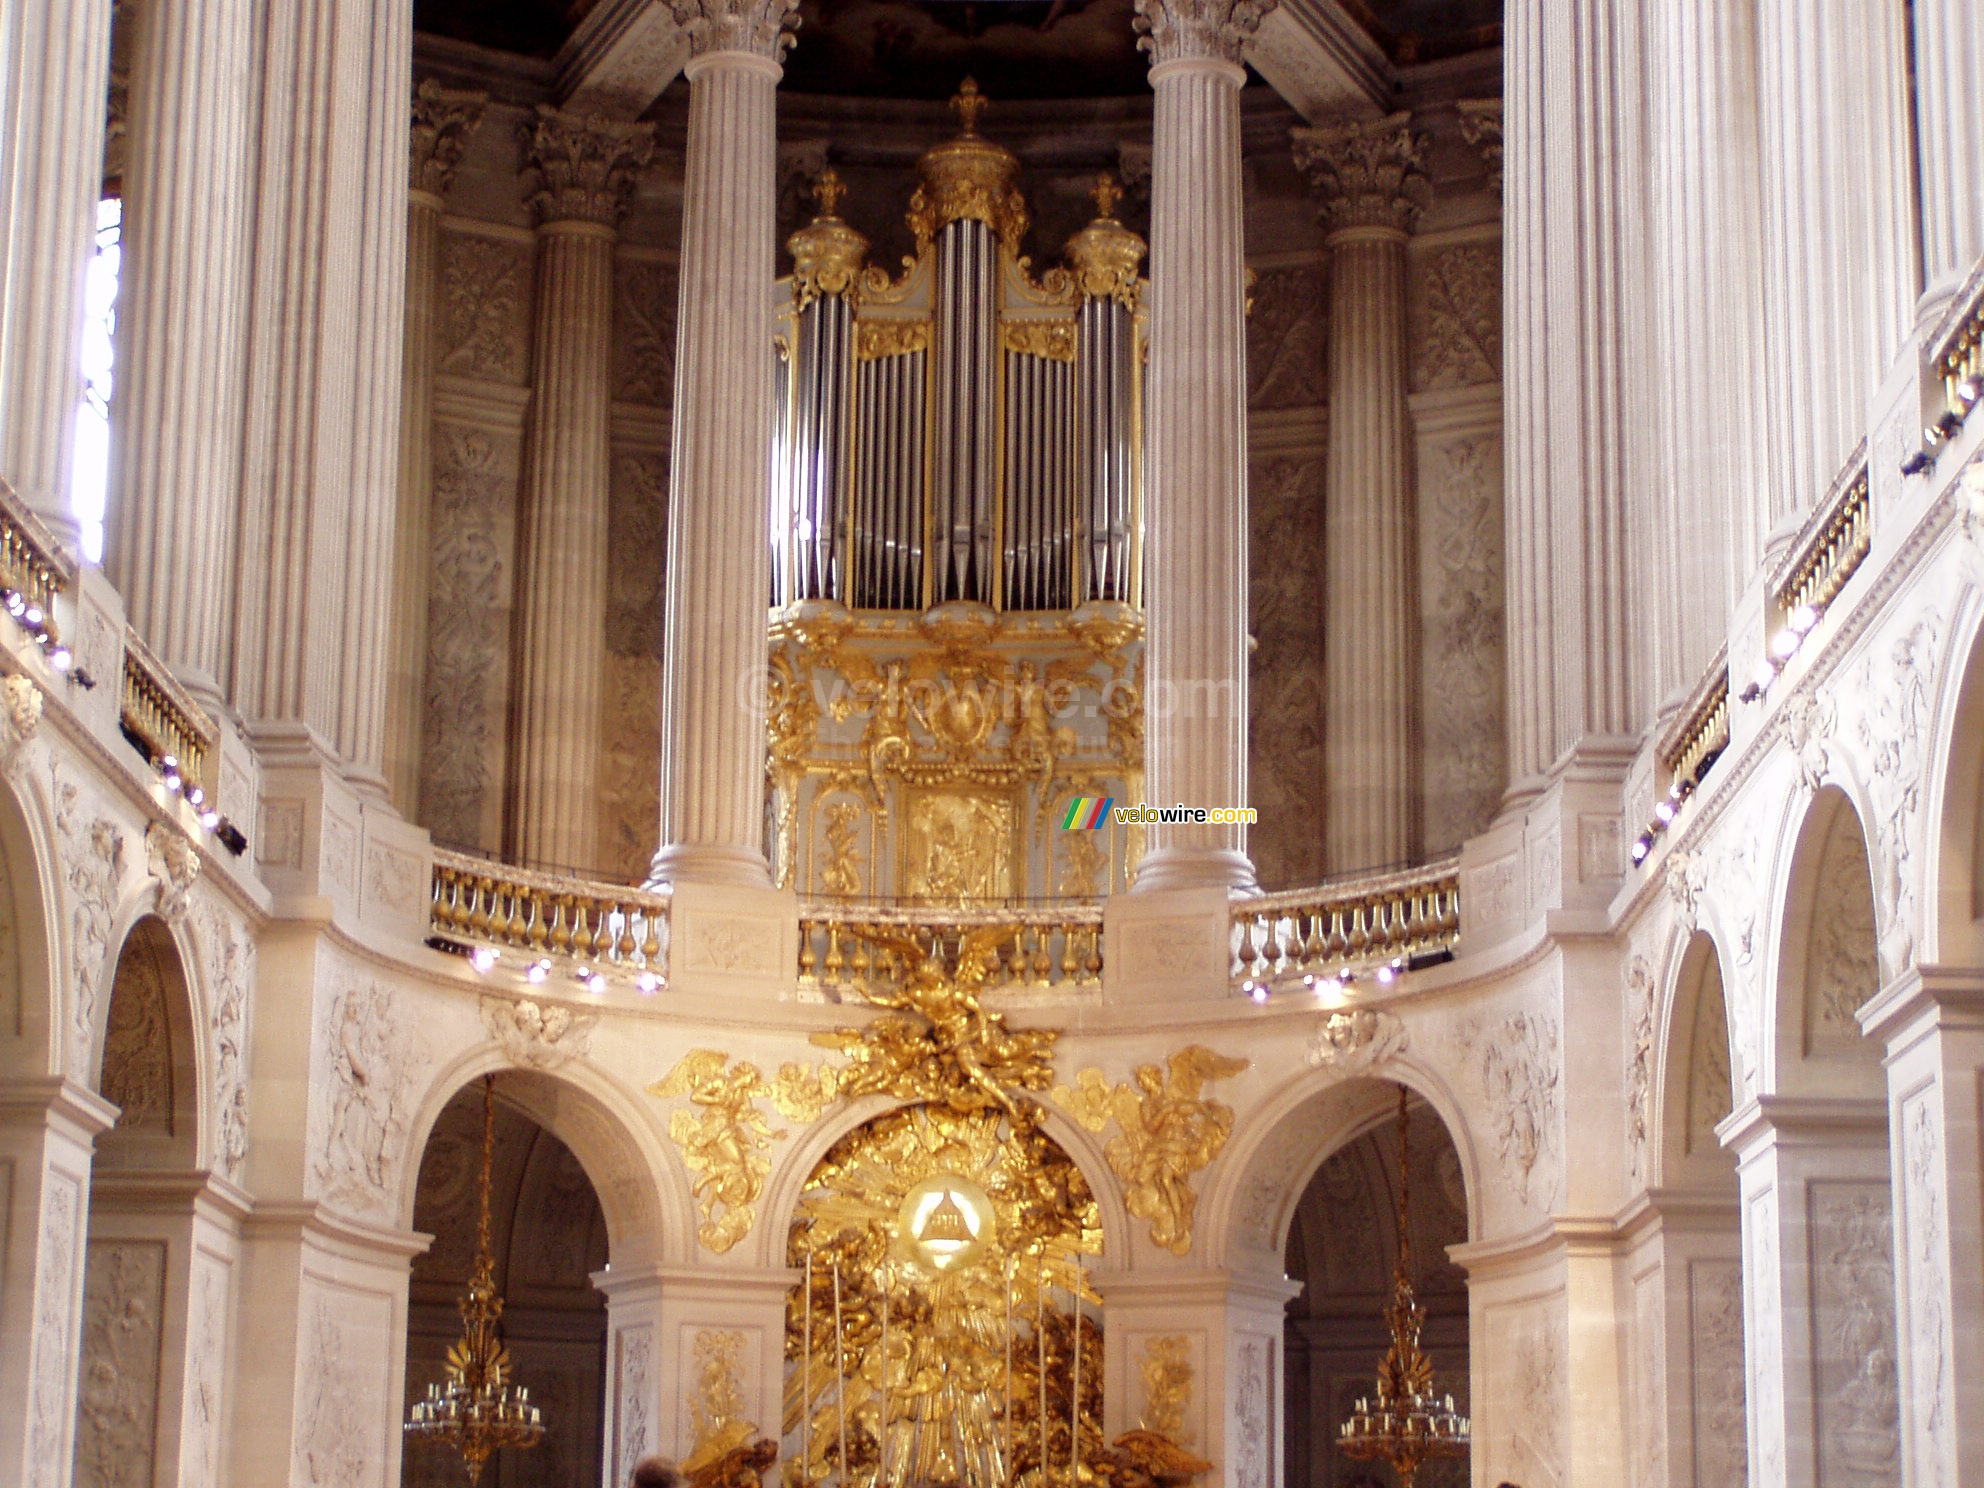 The organ above the altar in the castle of Versailles